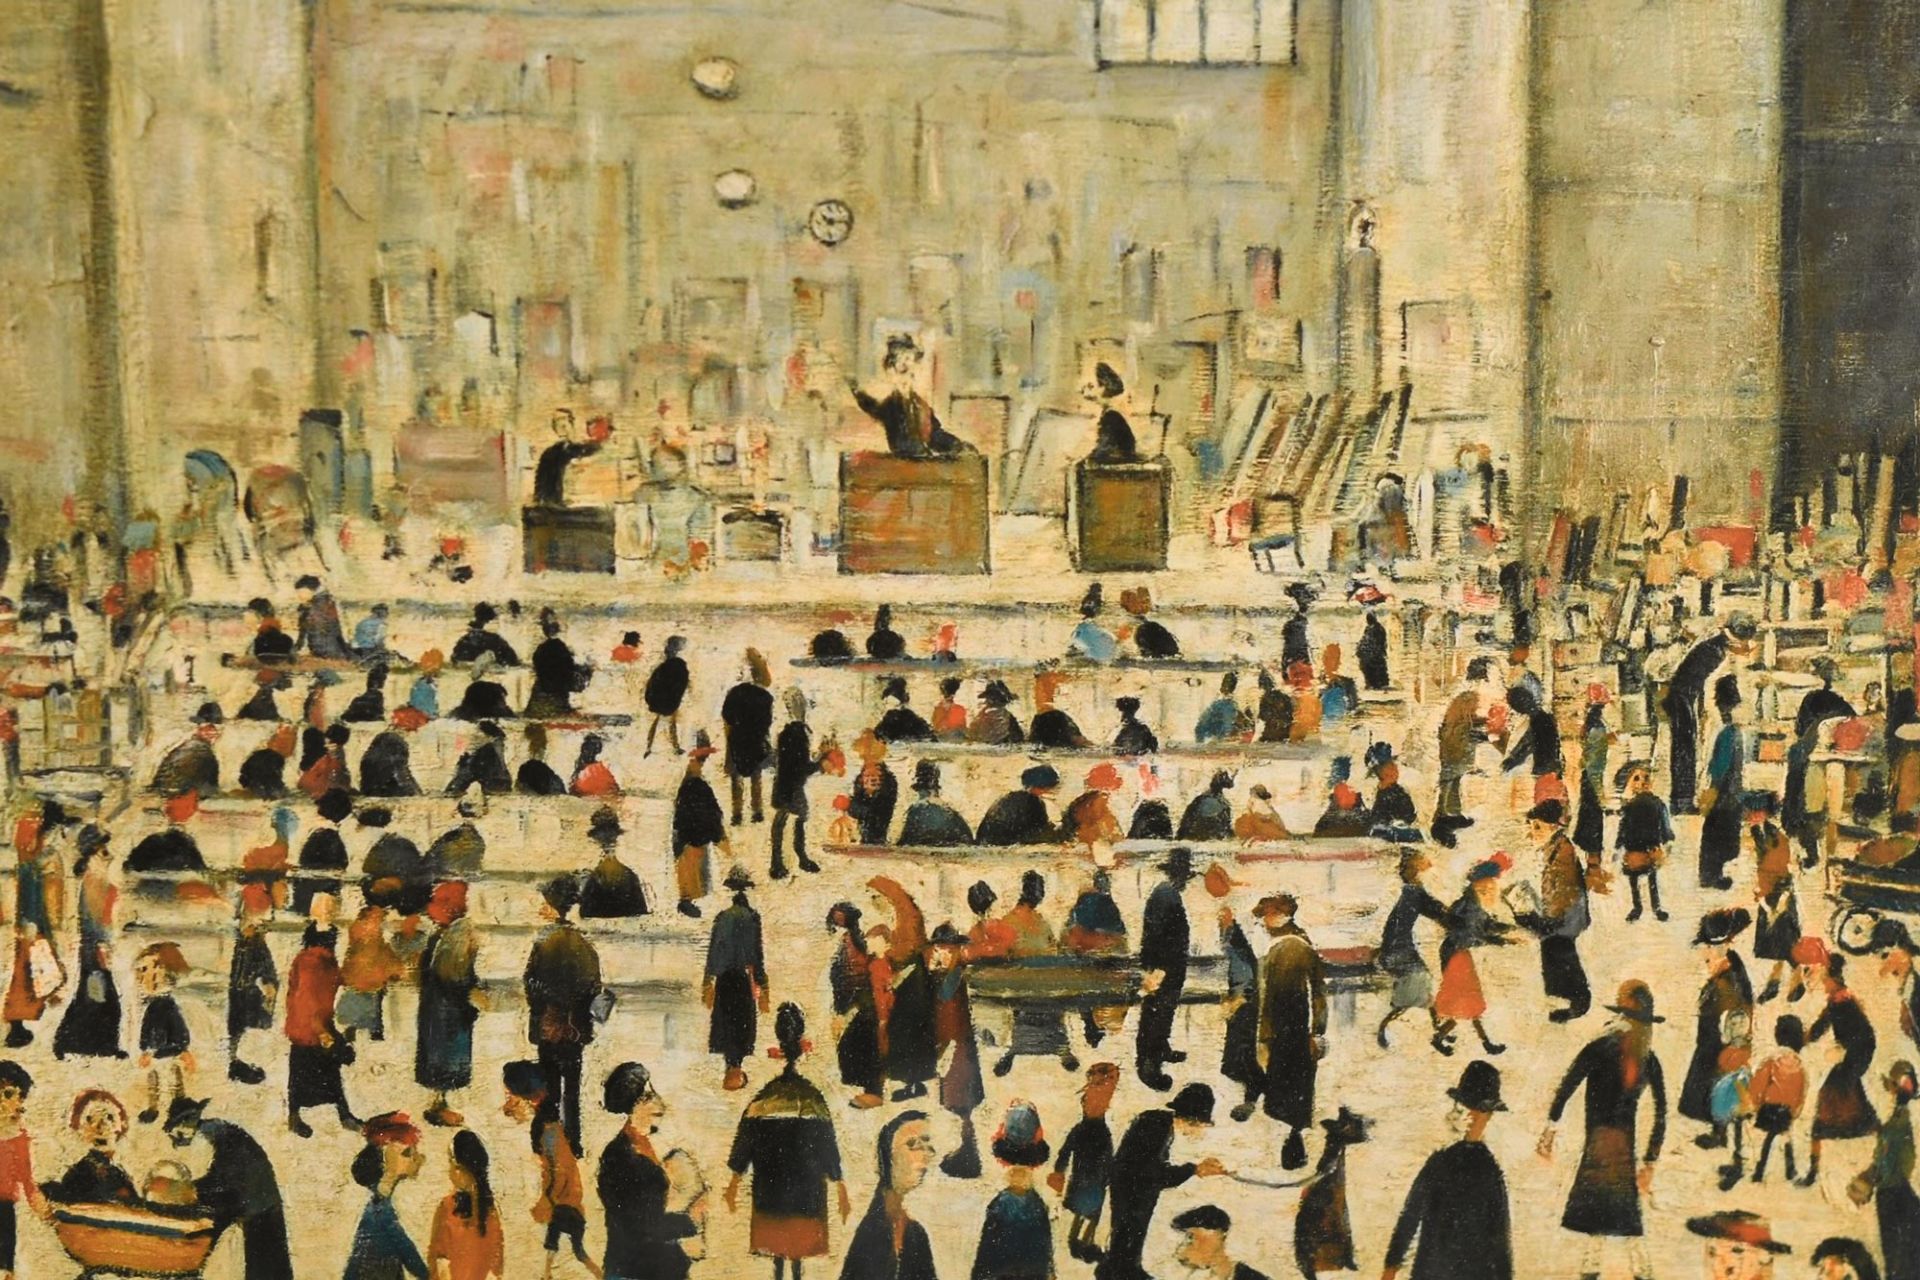 L.S. Lowry Limited Edition "The Auction" - Image 4 of 10